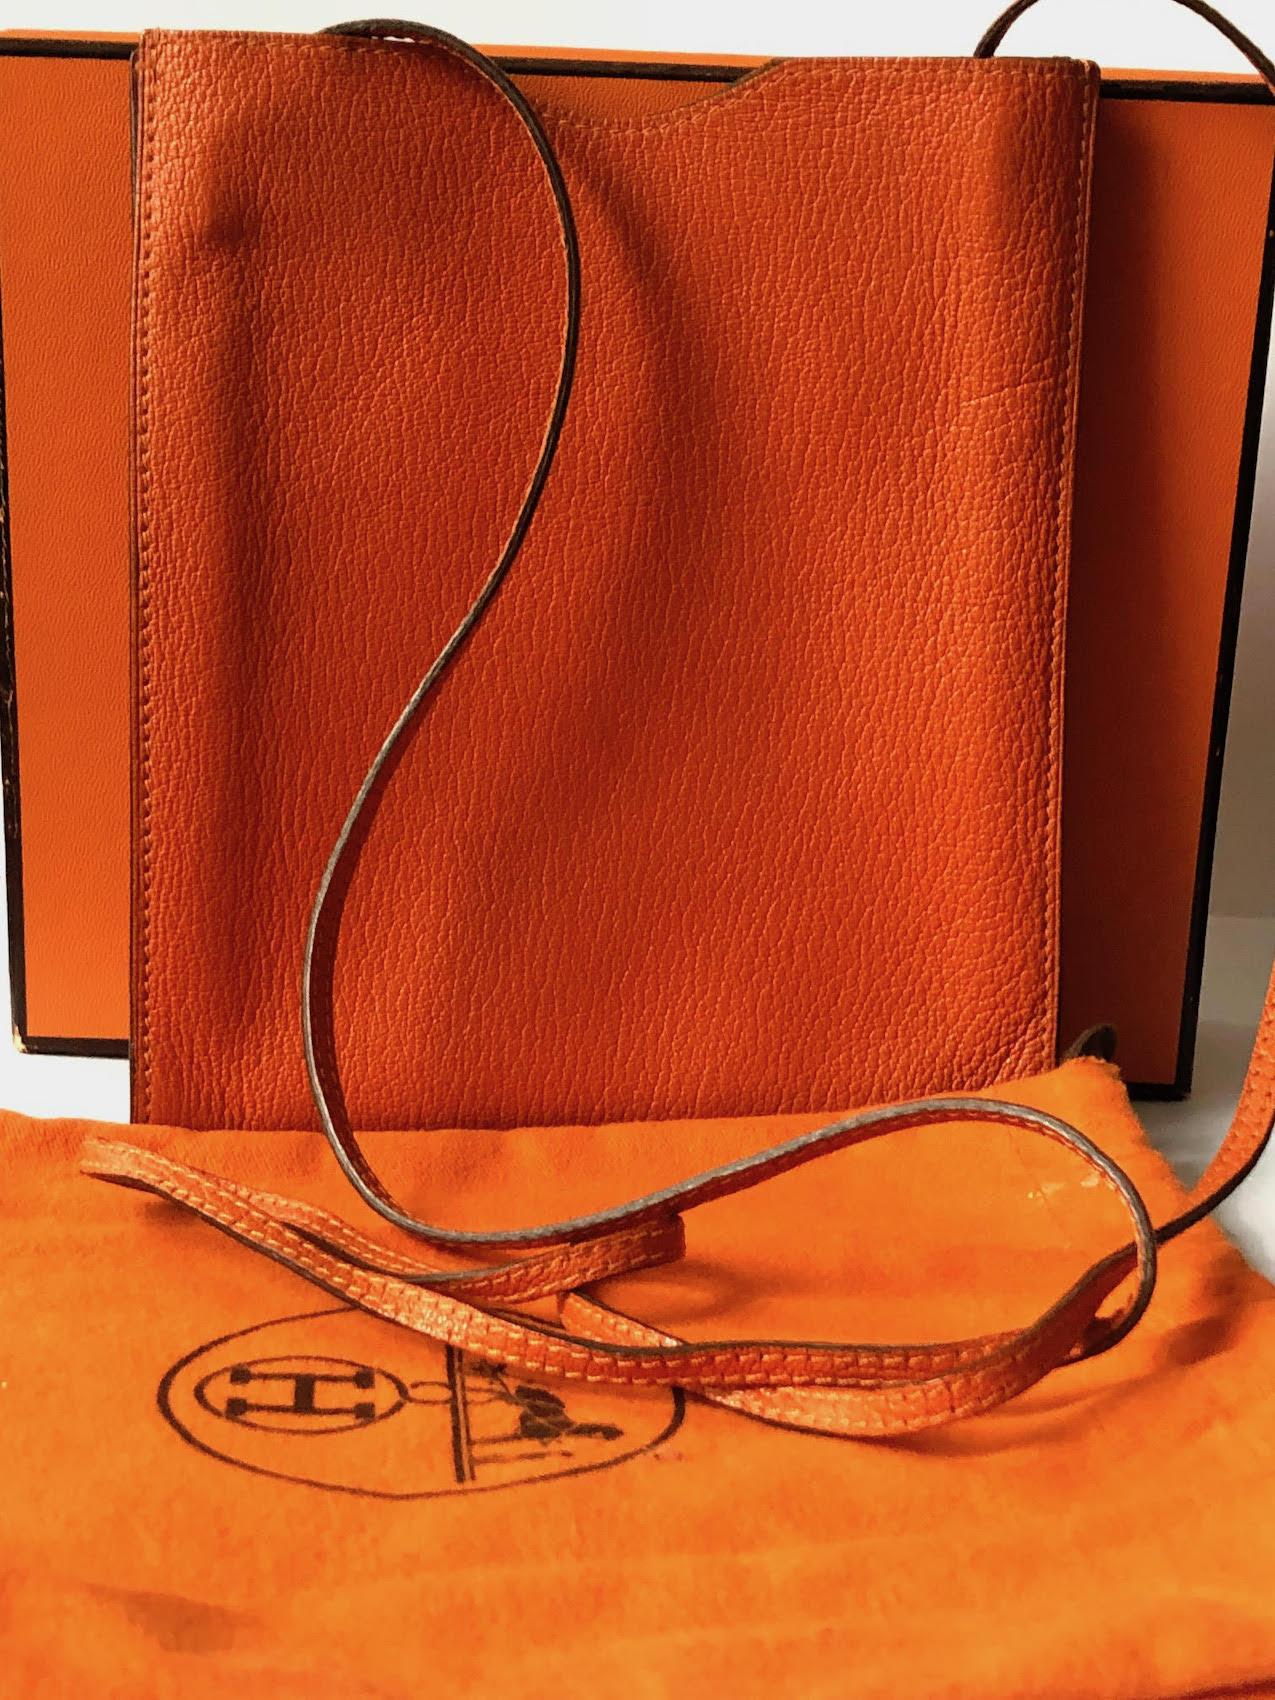 HERMÈS Vintage Onimaitou Crossbody Shoulder Bag Pochette Orange Clémence Leather Circa 2004
A small Hermès Onimaitou pouch-pochette orange bag, long strap for shoulder or cross-body, in very good condition. Handcrafted in orange soft grained